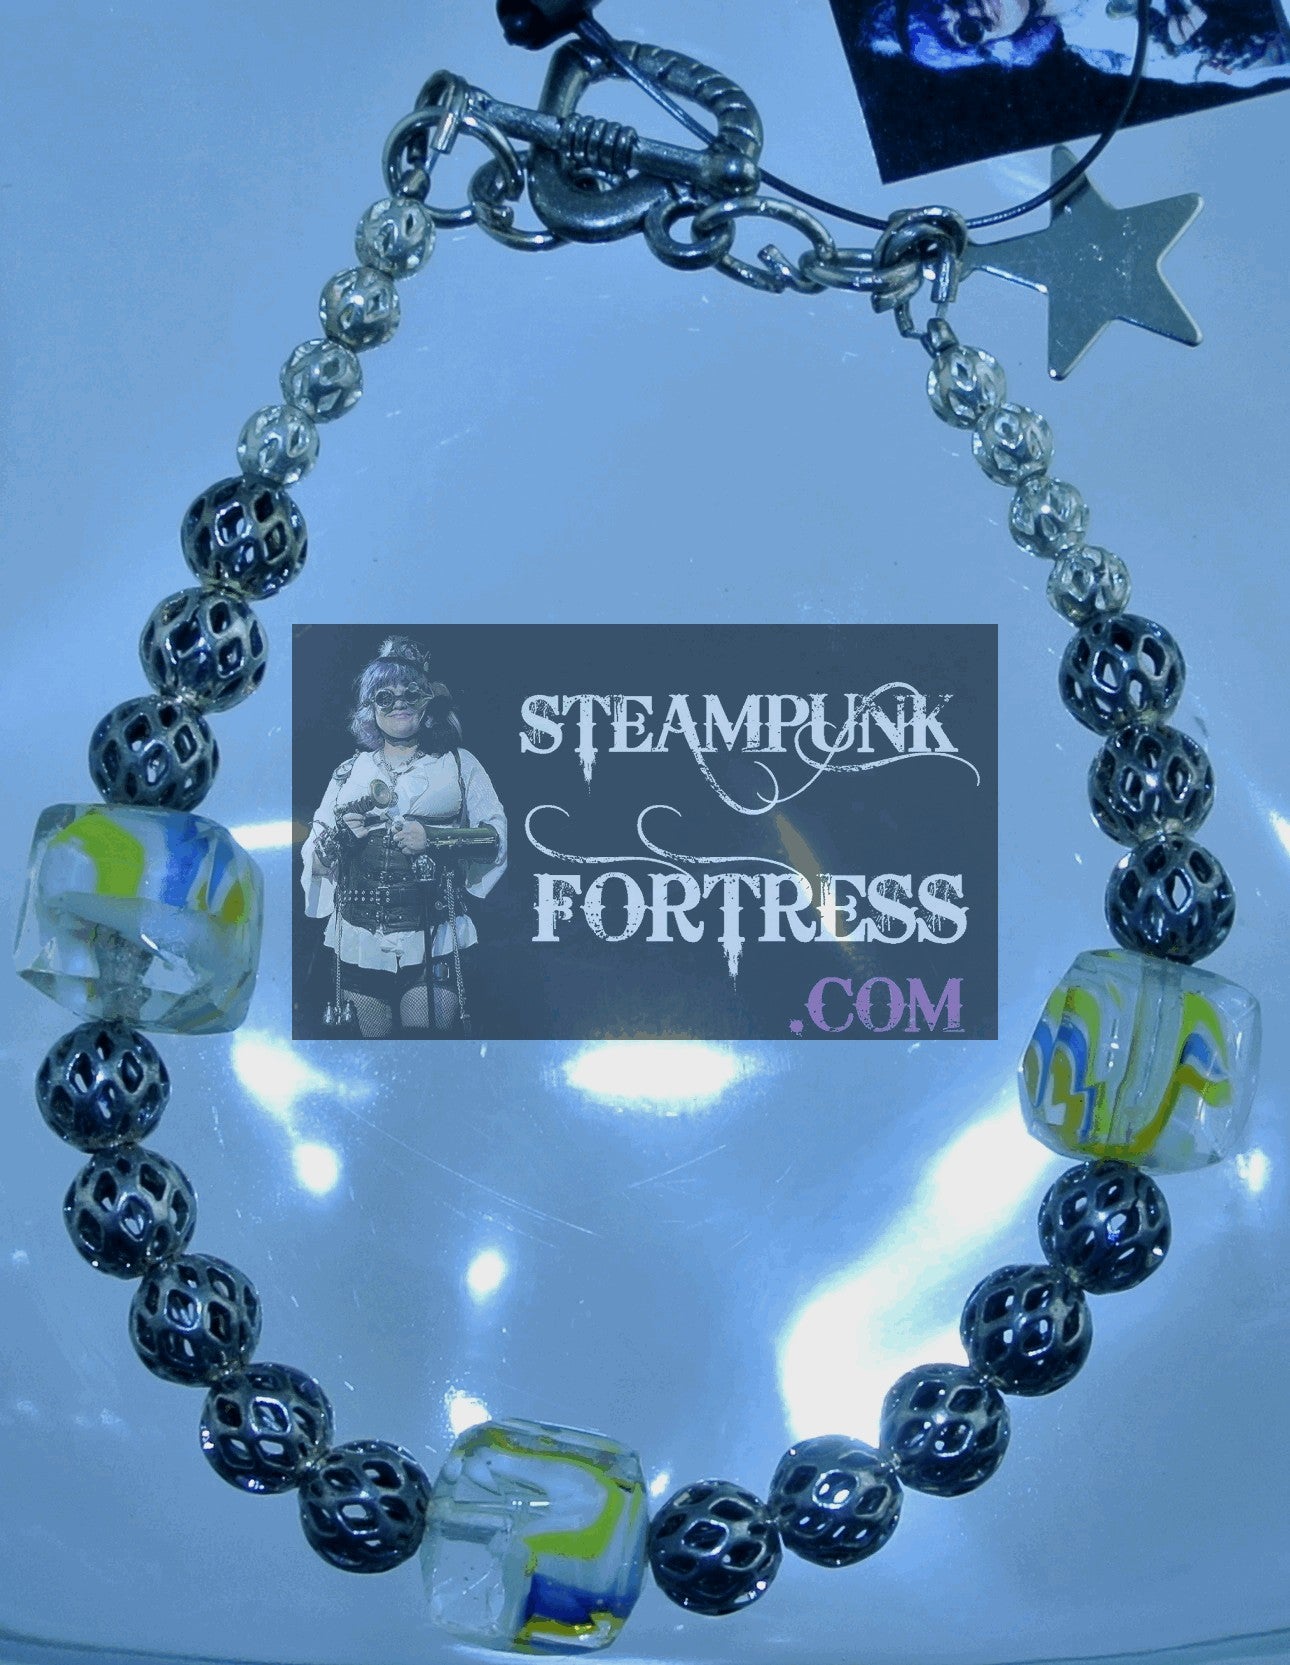 GLOW IN THE DARK YELLOW CLEAR BEADS SILVER FILIGREE BEADS BRACELET SET AVAILABLE STARR WILDE STEAMPUNK FORTRESS